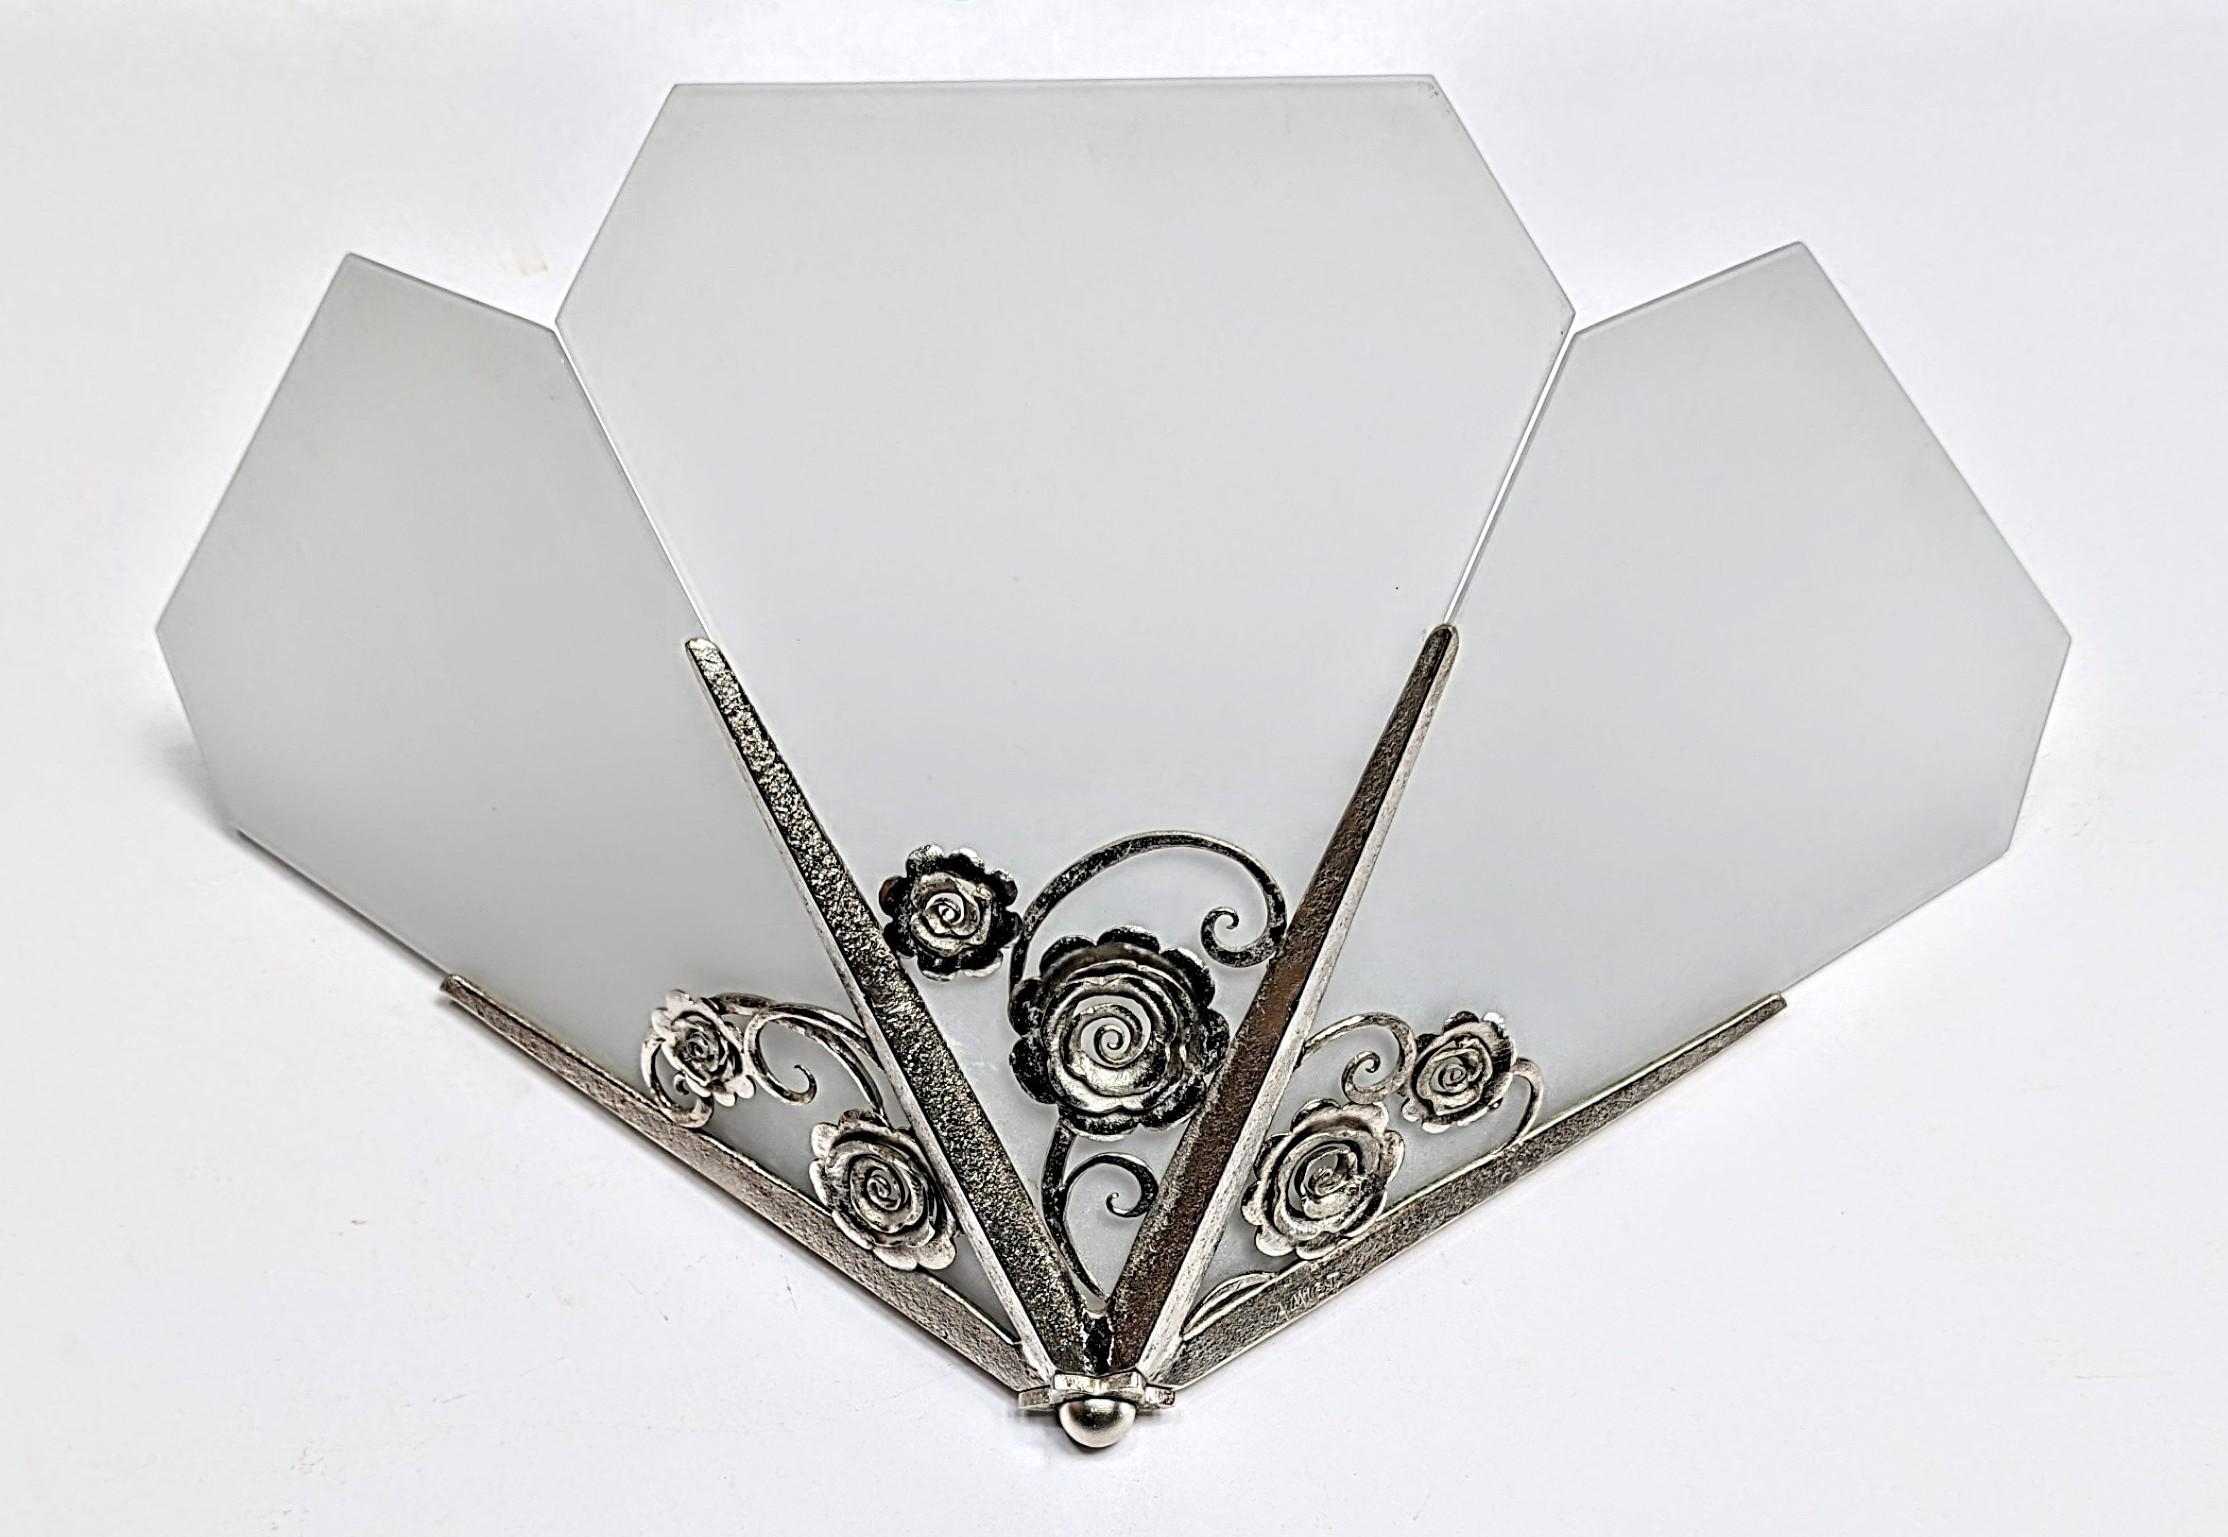 Exceptional pair of French Art Deco wall sconces signed Amiot. Hand-forged wrought iron in different textures with fine intricate leaves and flower motifs. Diamond shape frosted glass panels. Each sconce was rewired to U.S. standards, accommodating